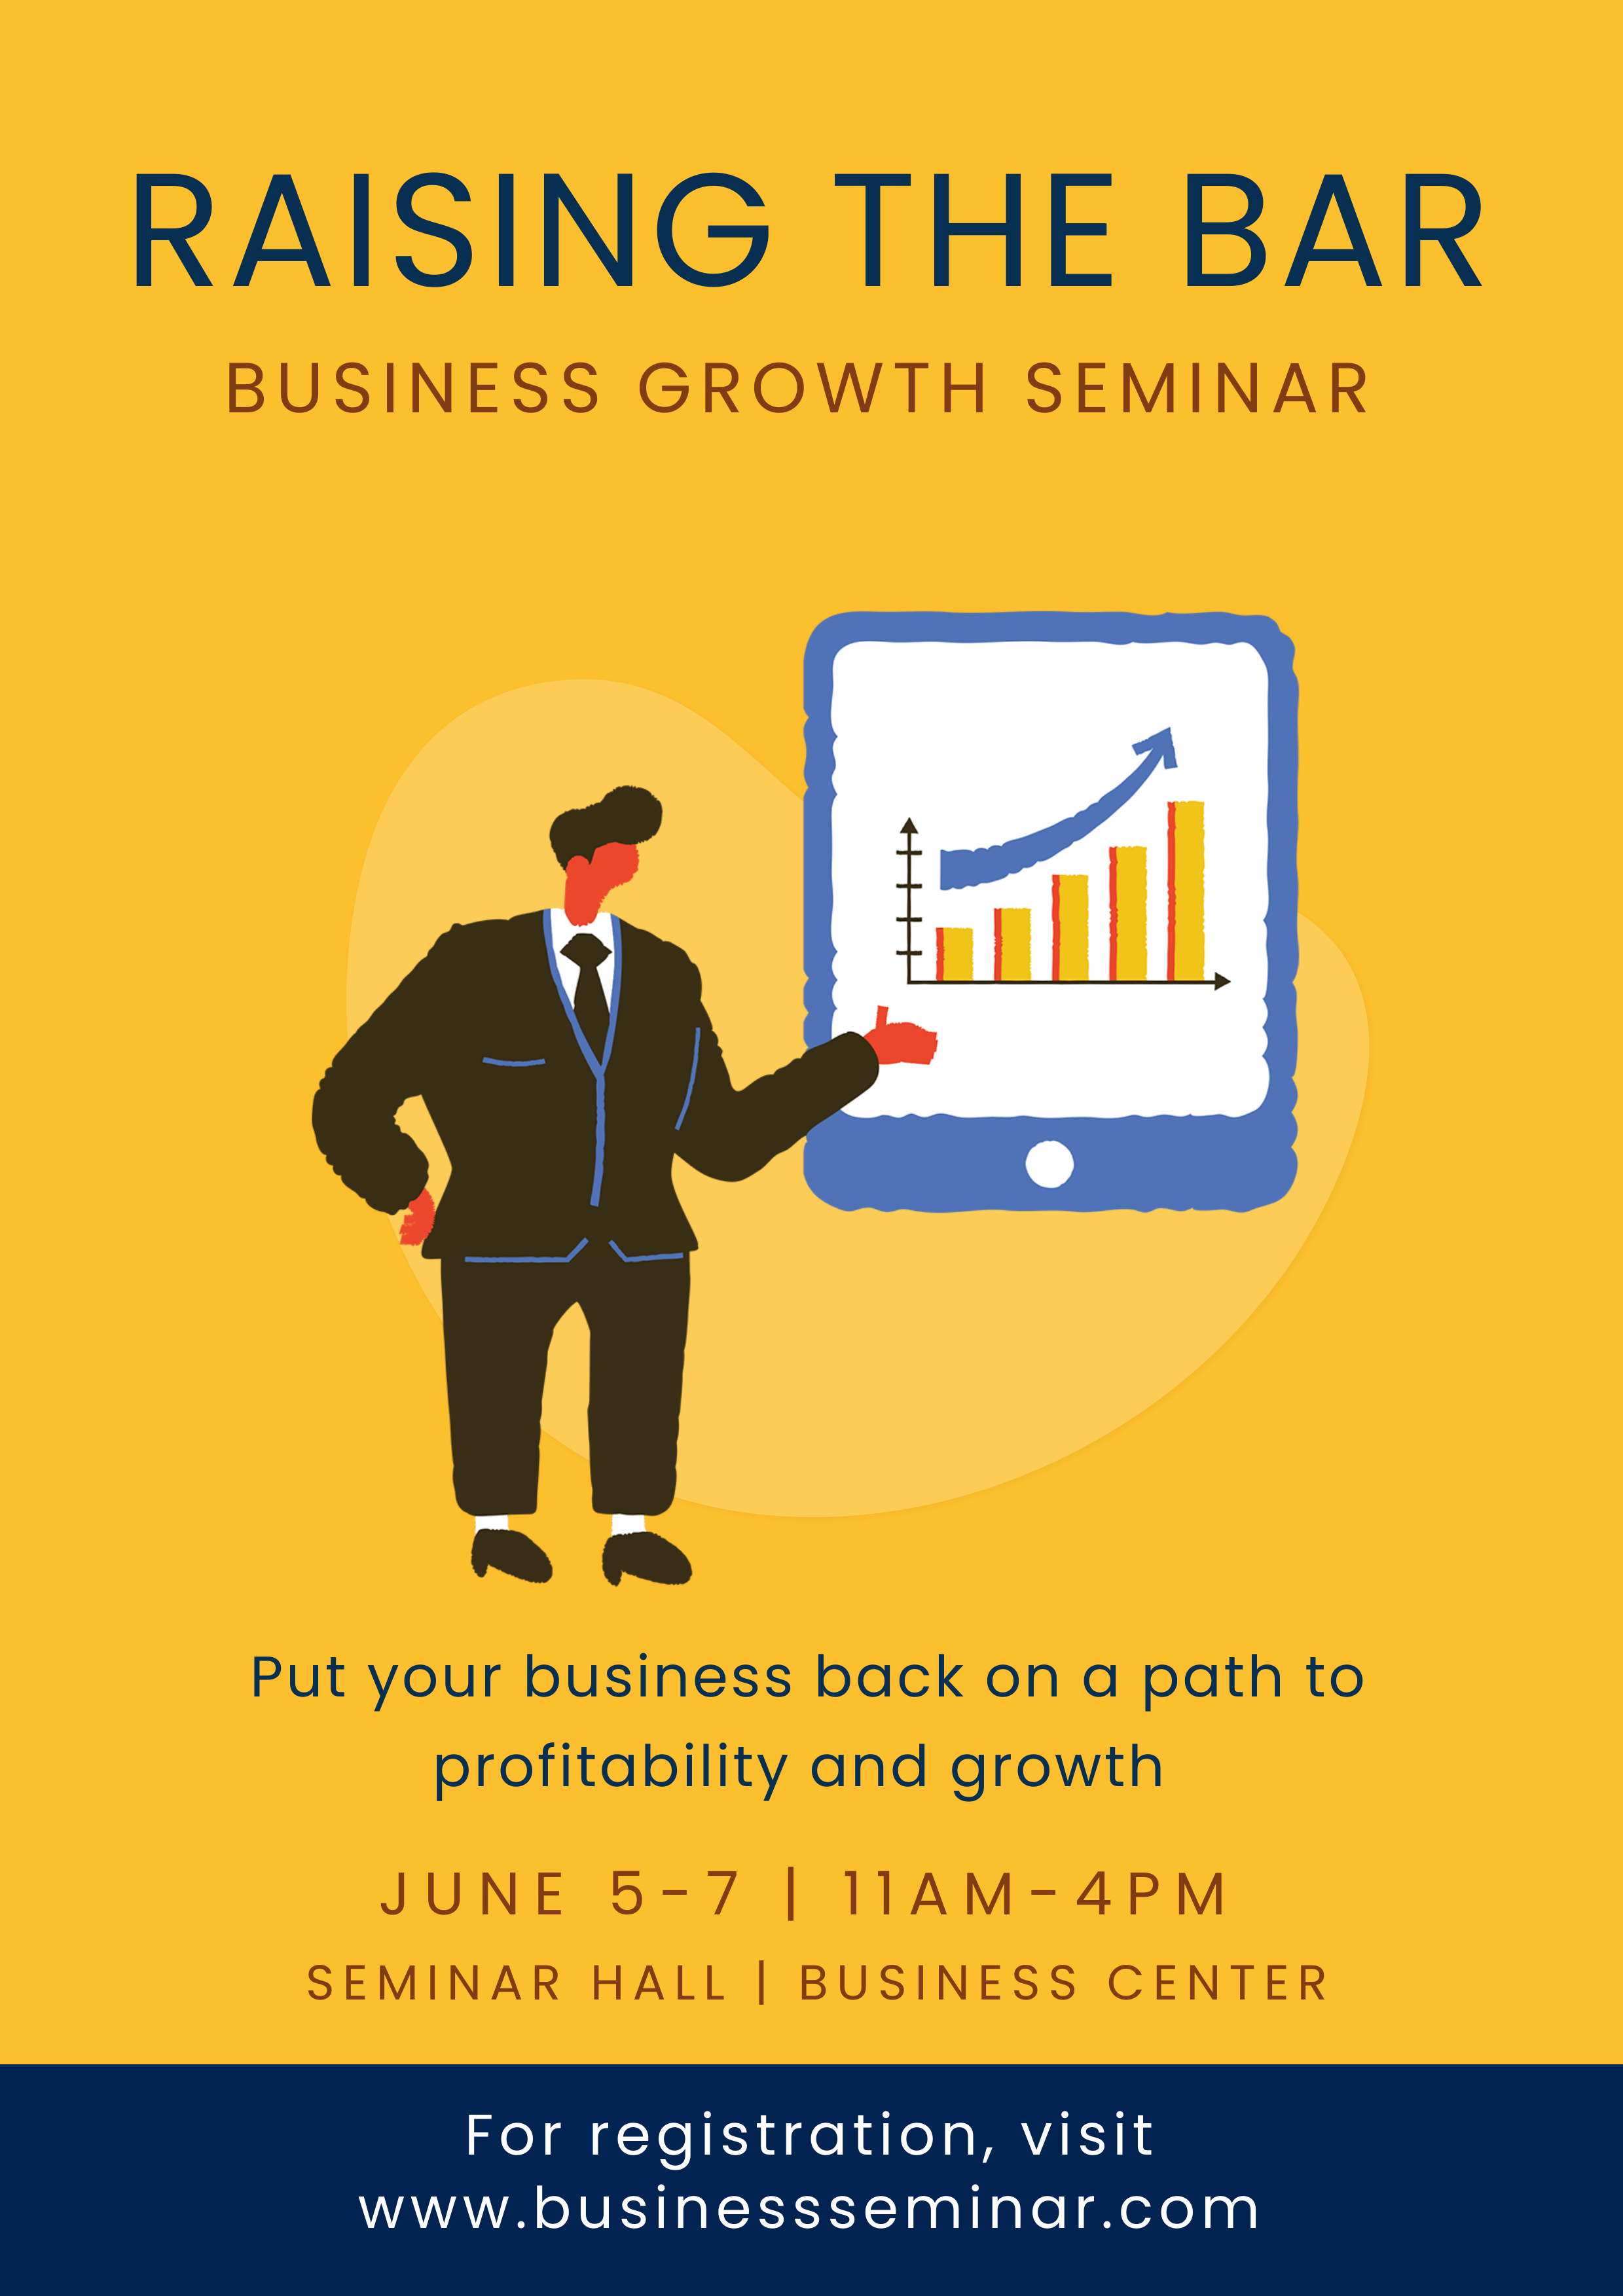 Business Poster Template